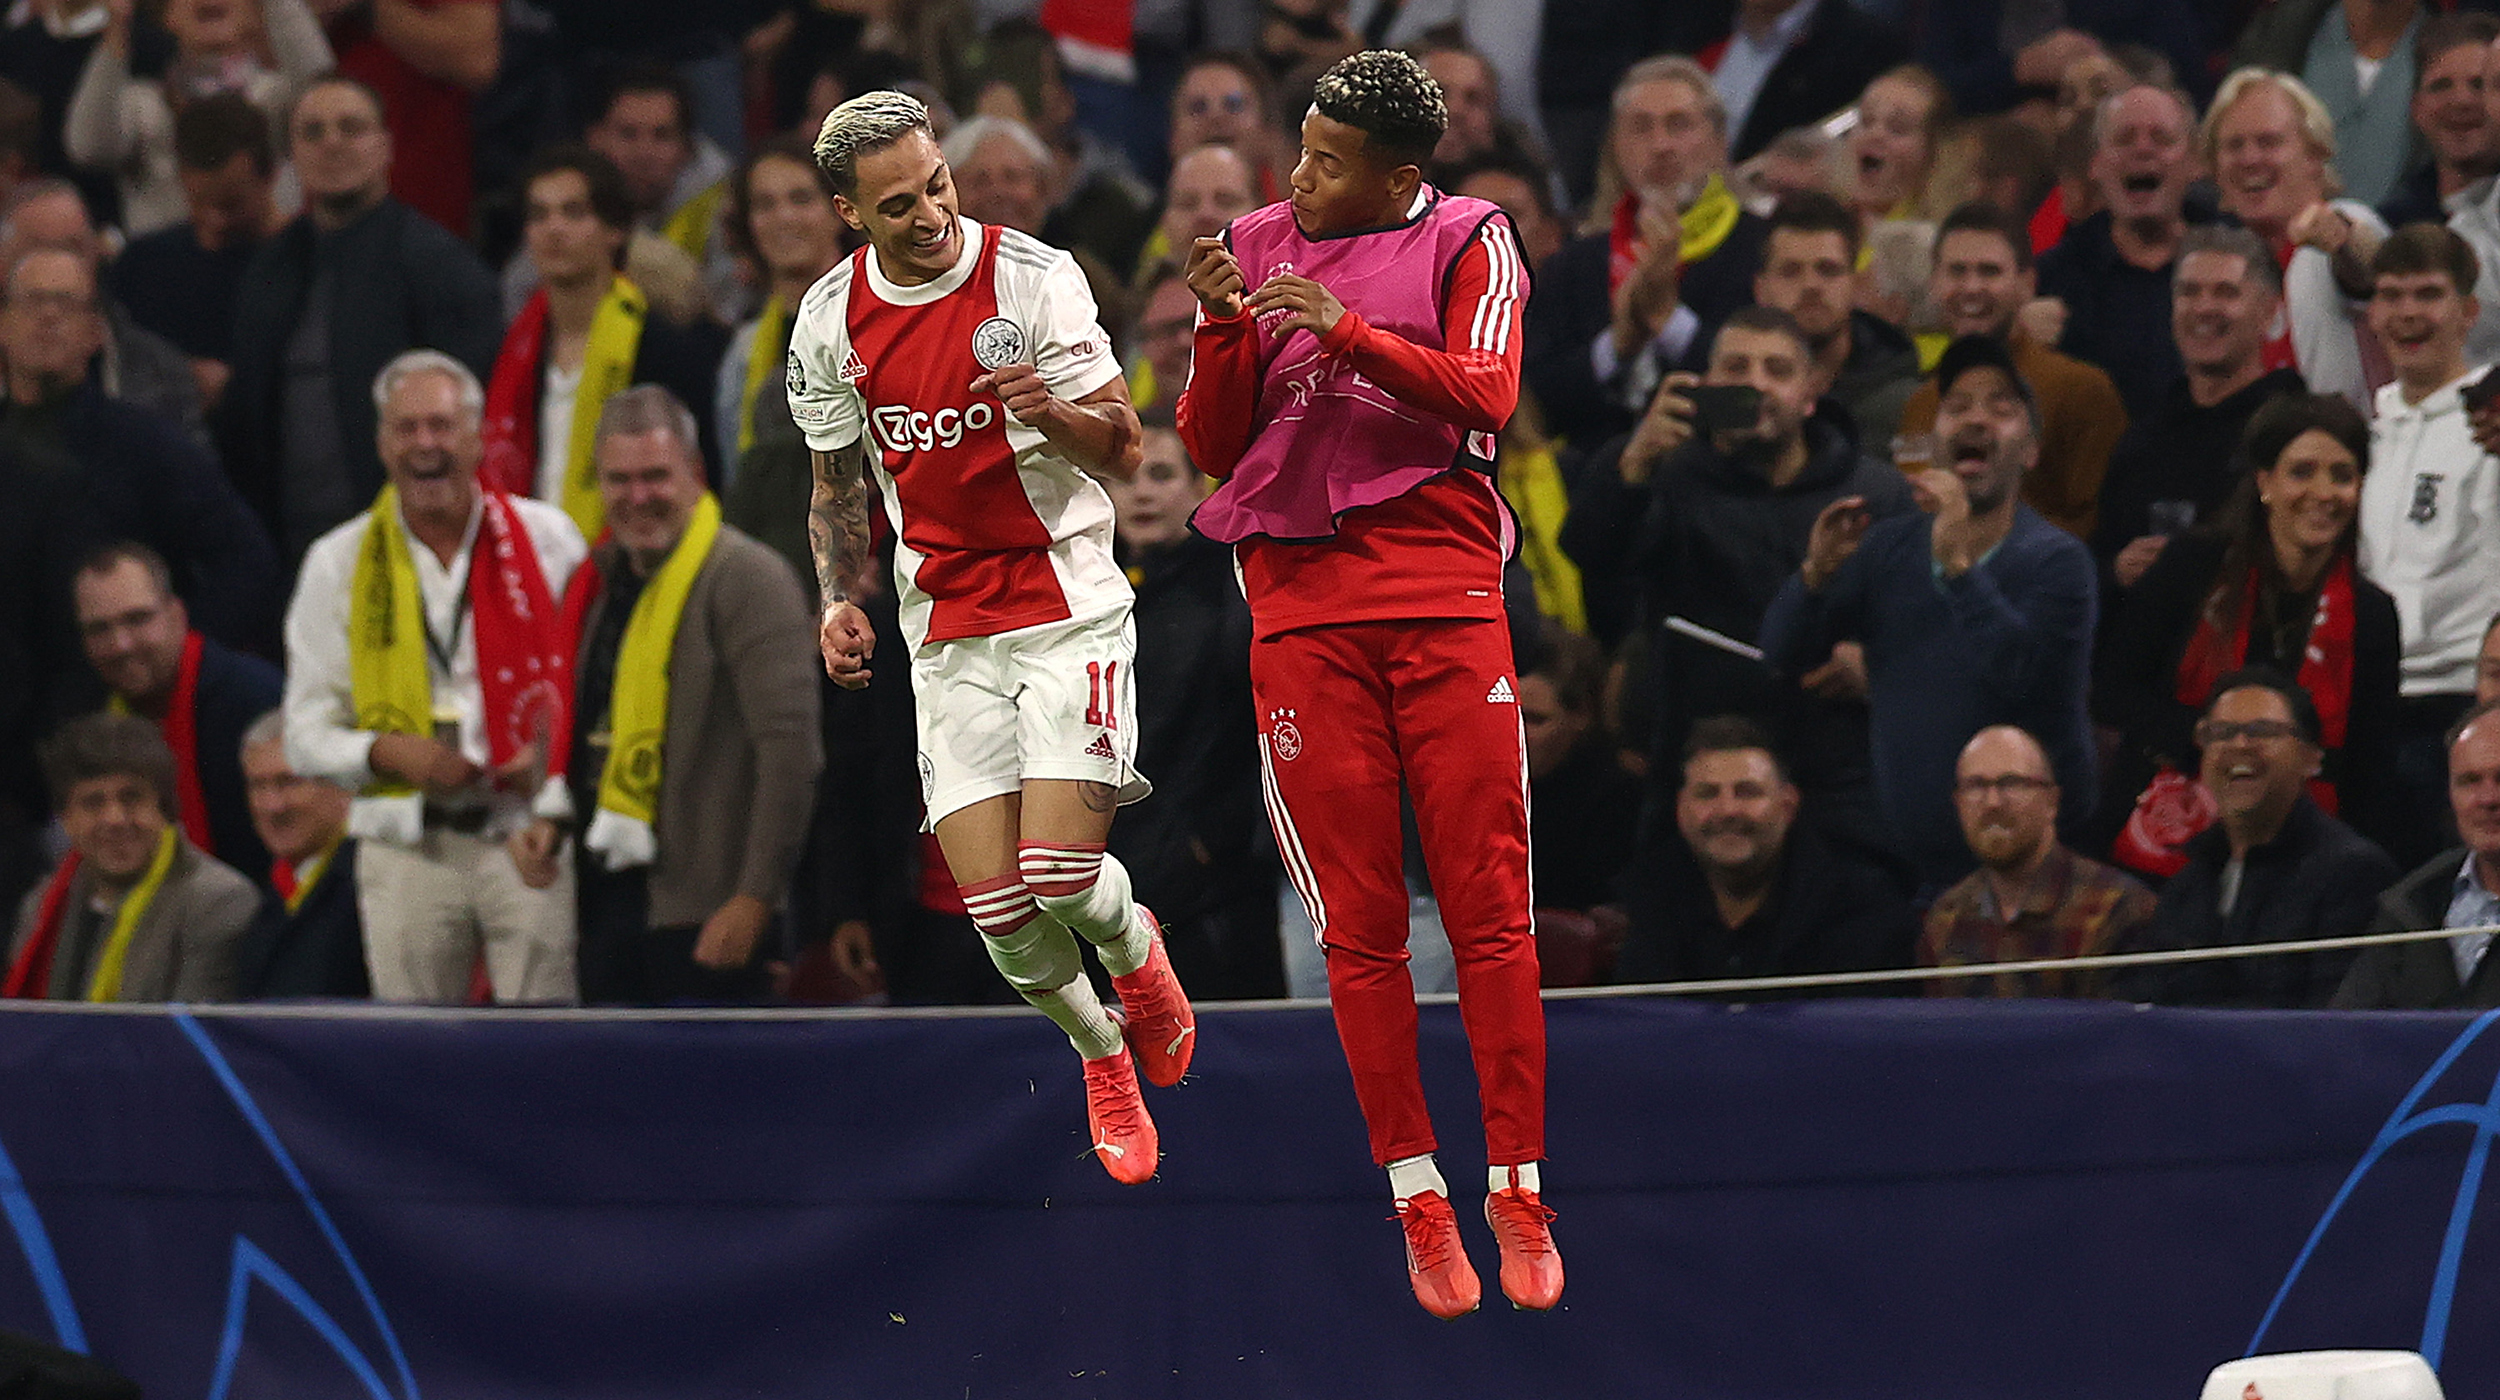 Antony of Ajax celebrates with David Neres after scoring their side's third goal during the UEFA Champions League group C match between AFC Ajax and Borussia Dortmund at Amsterdam Arena on October 19, 2021 in Amsterdam, Netherlands.